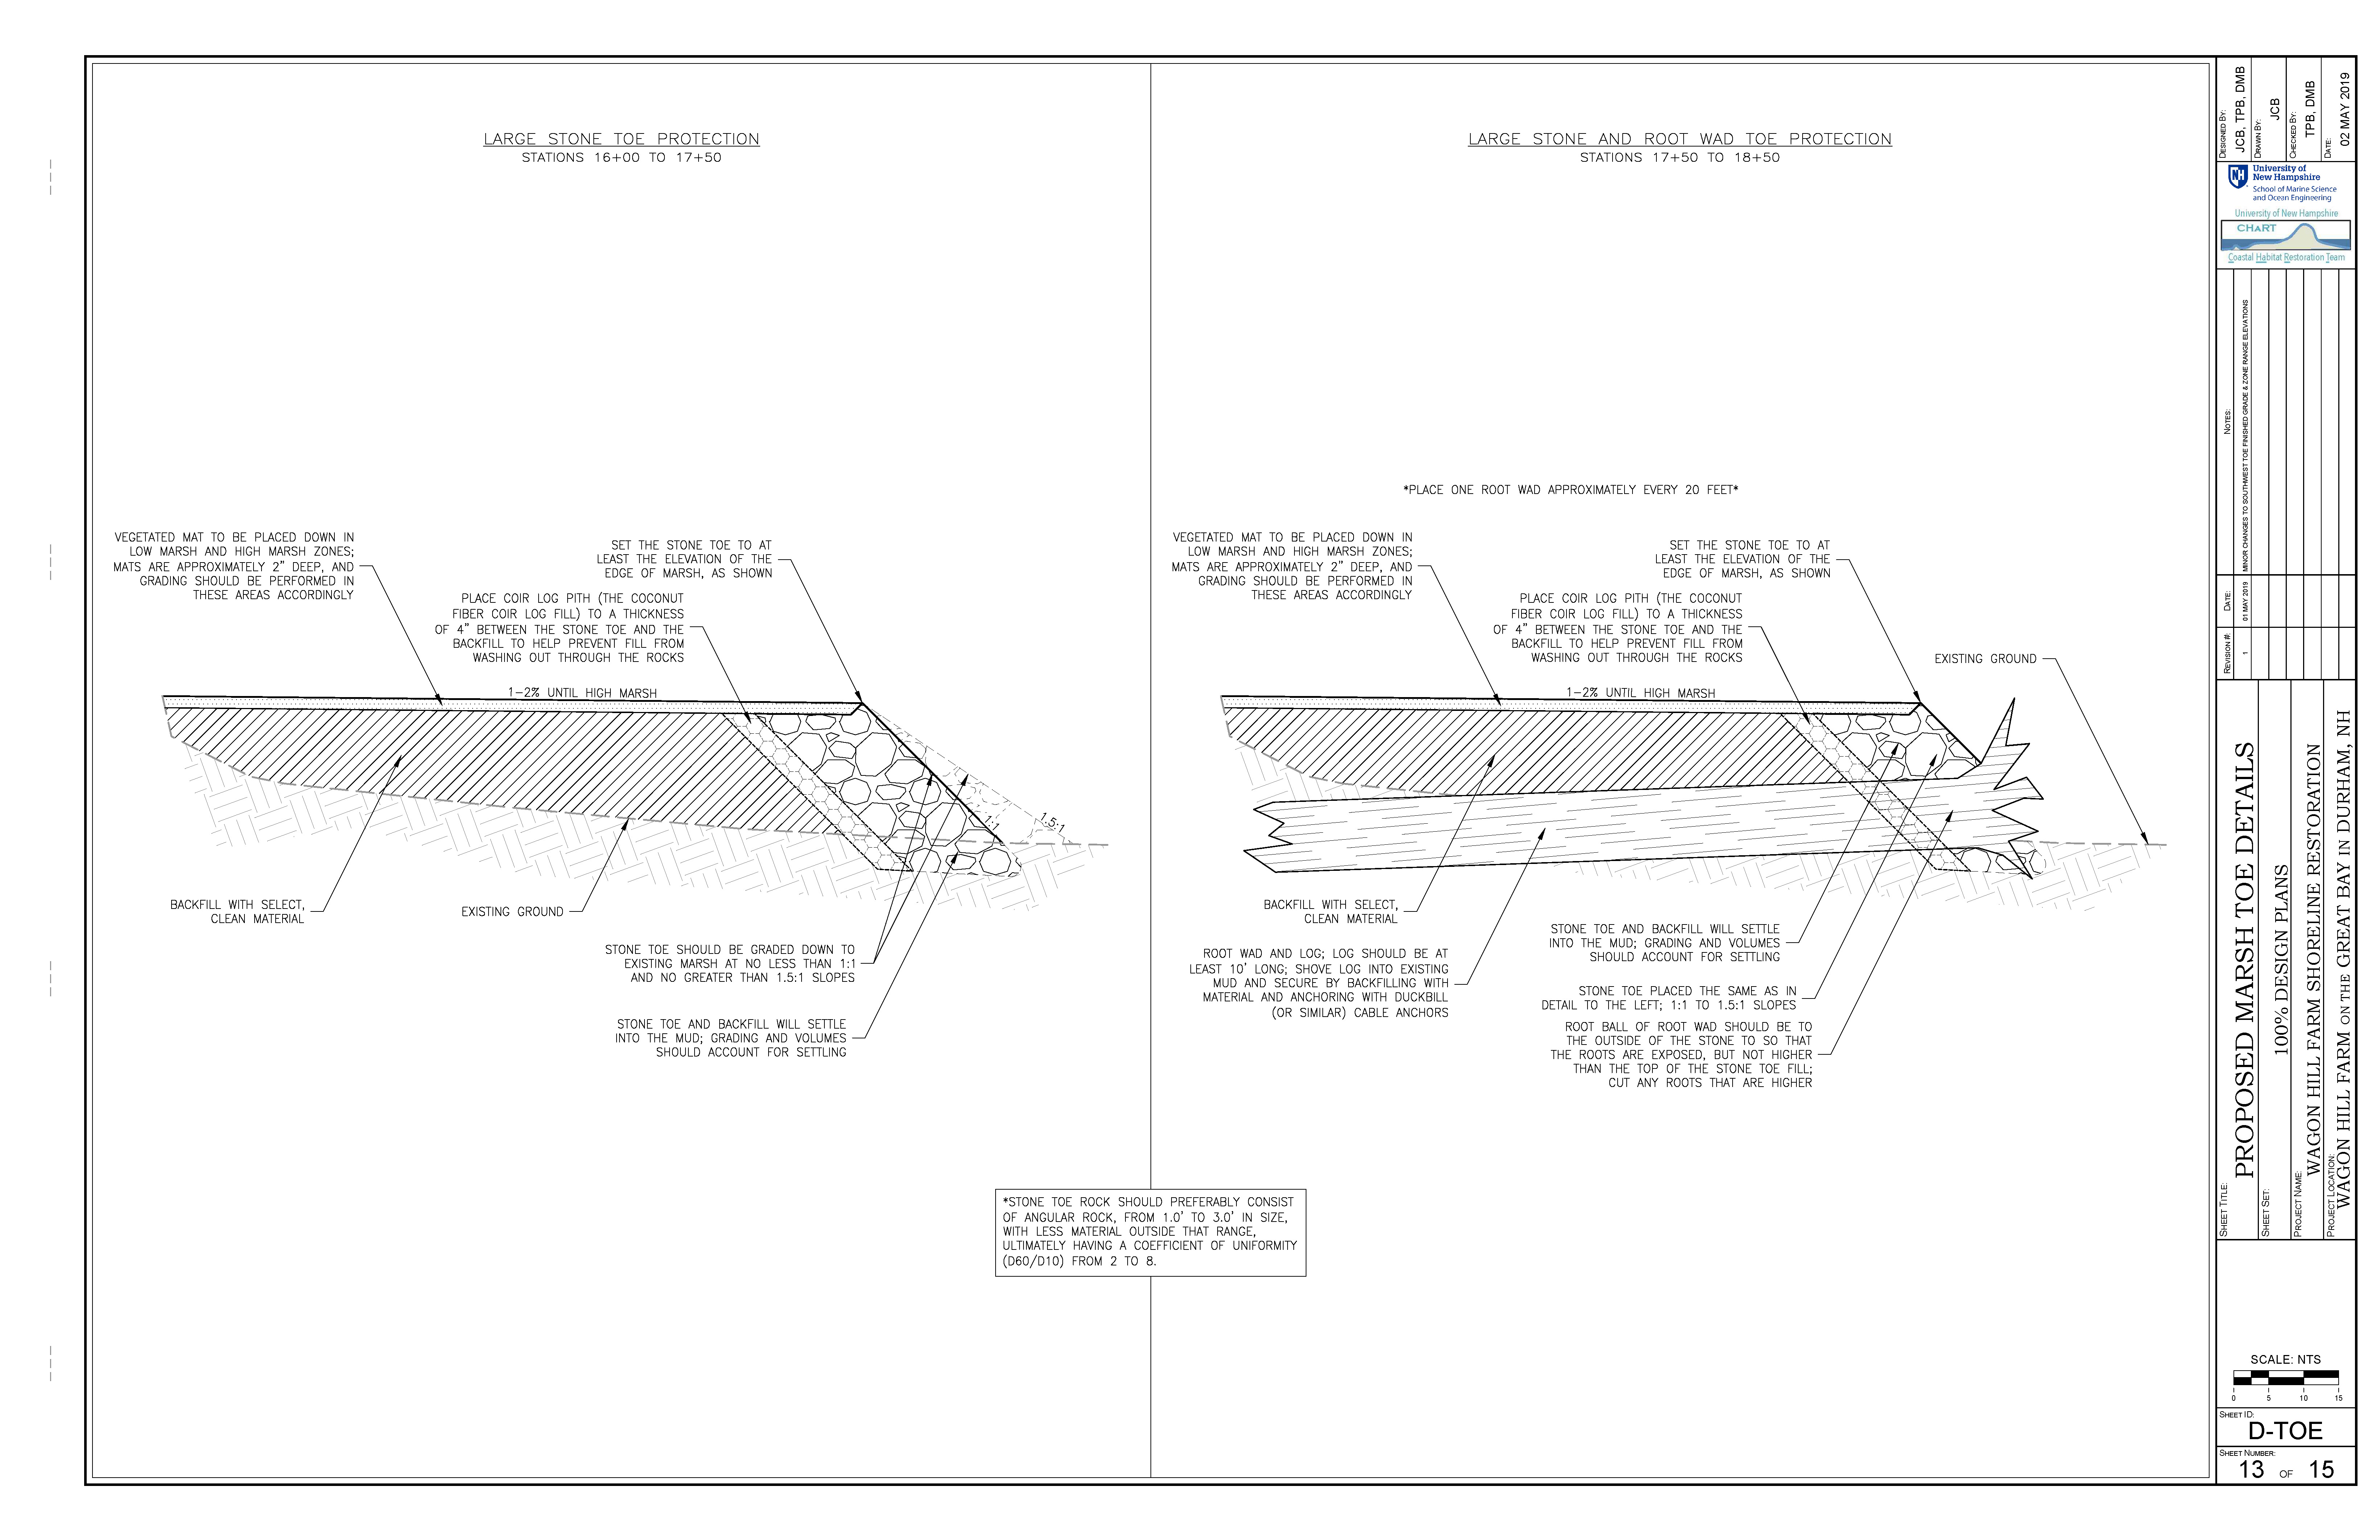 Engineering drawings show side-by-side designs for toe protection as part of a living shoreline.